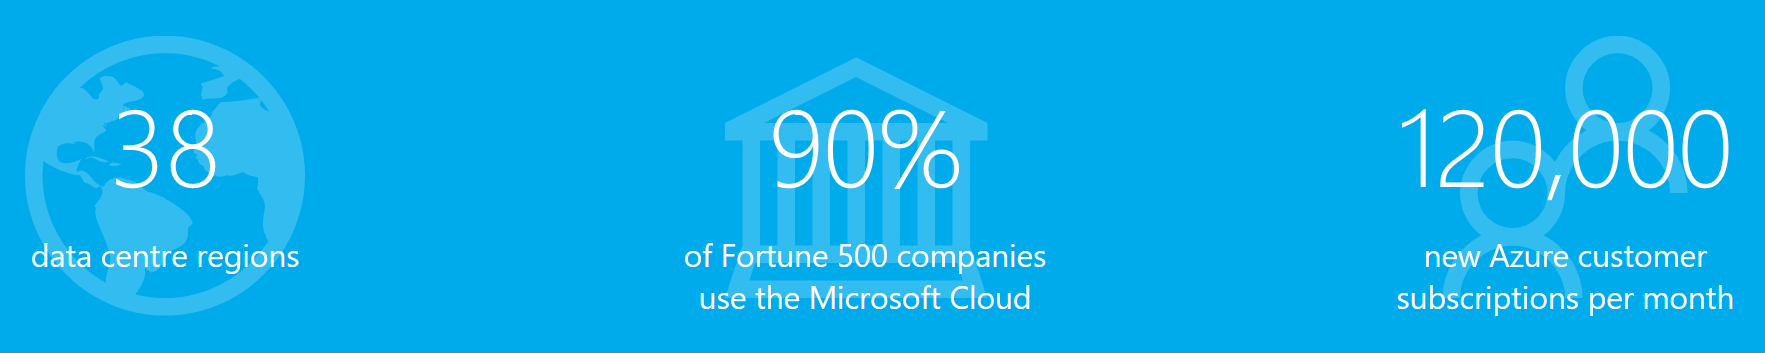 Azure facts